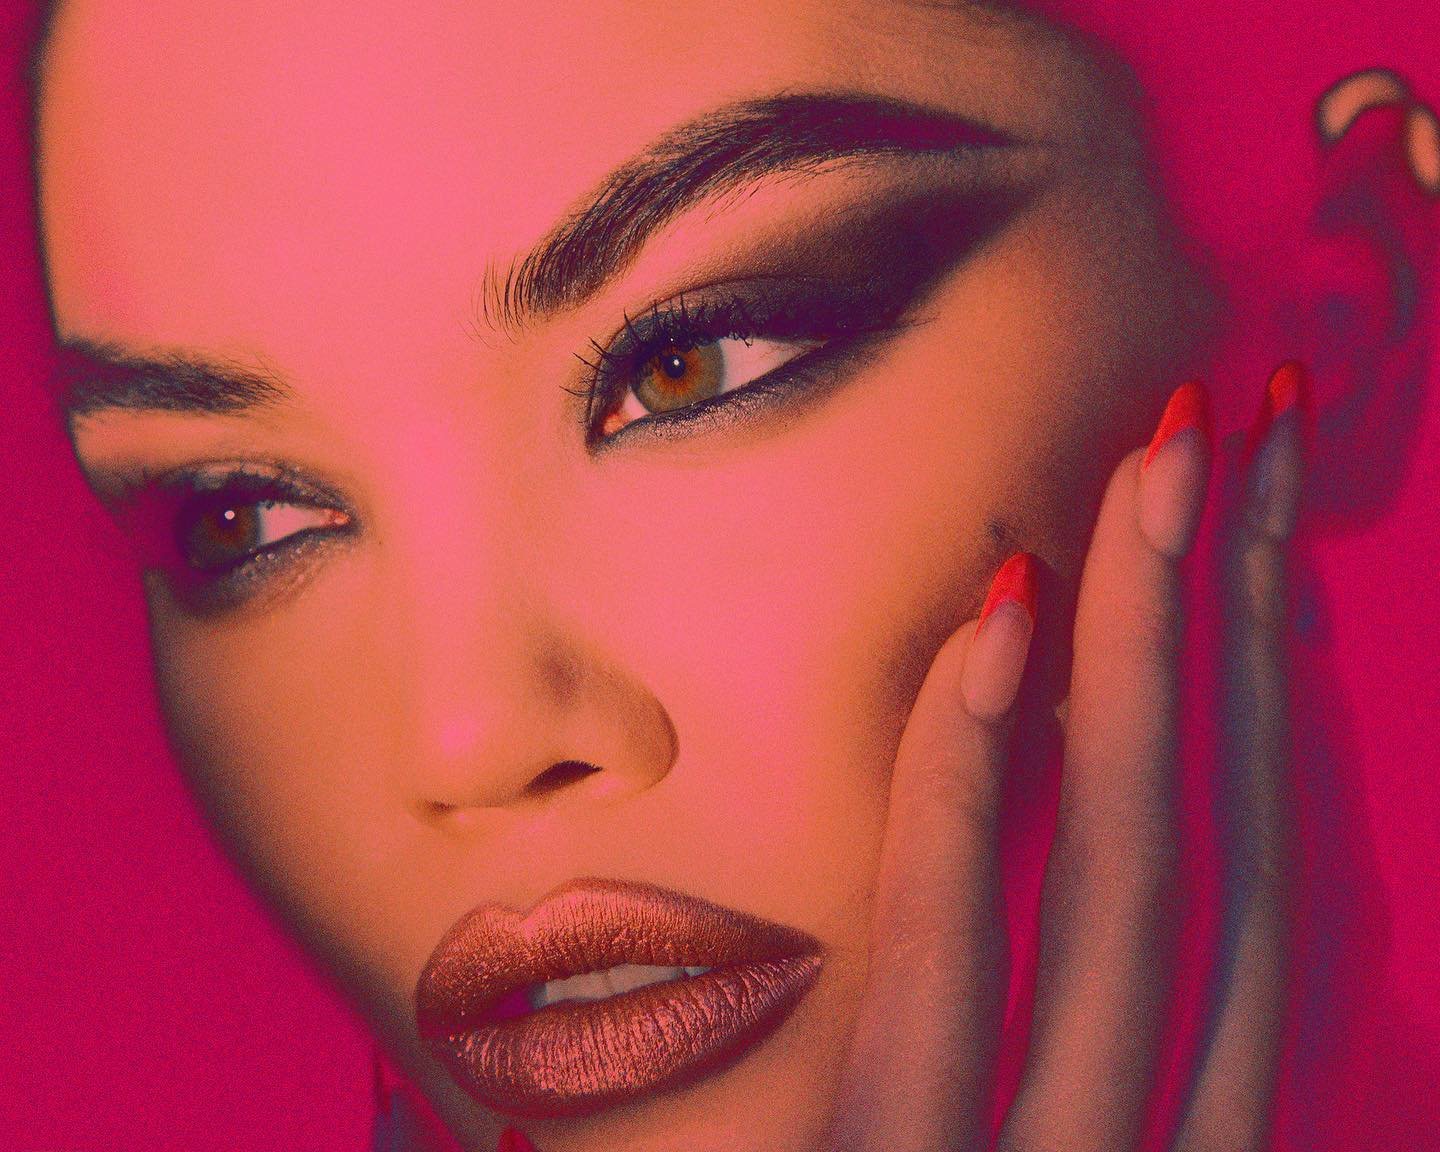 💄💅X-Ray Pop Art💅💄
Starring @theparisberelc with beauty by @paulyblanch 🖌️ #thomkerr #parisberelc #paulyblanch #beauty #popart